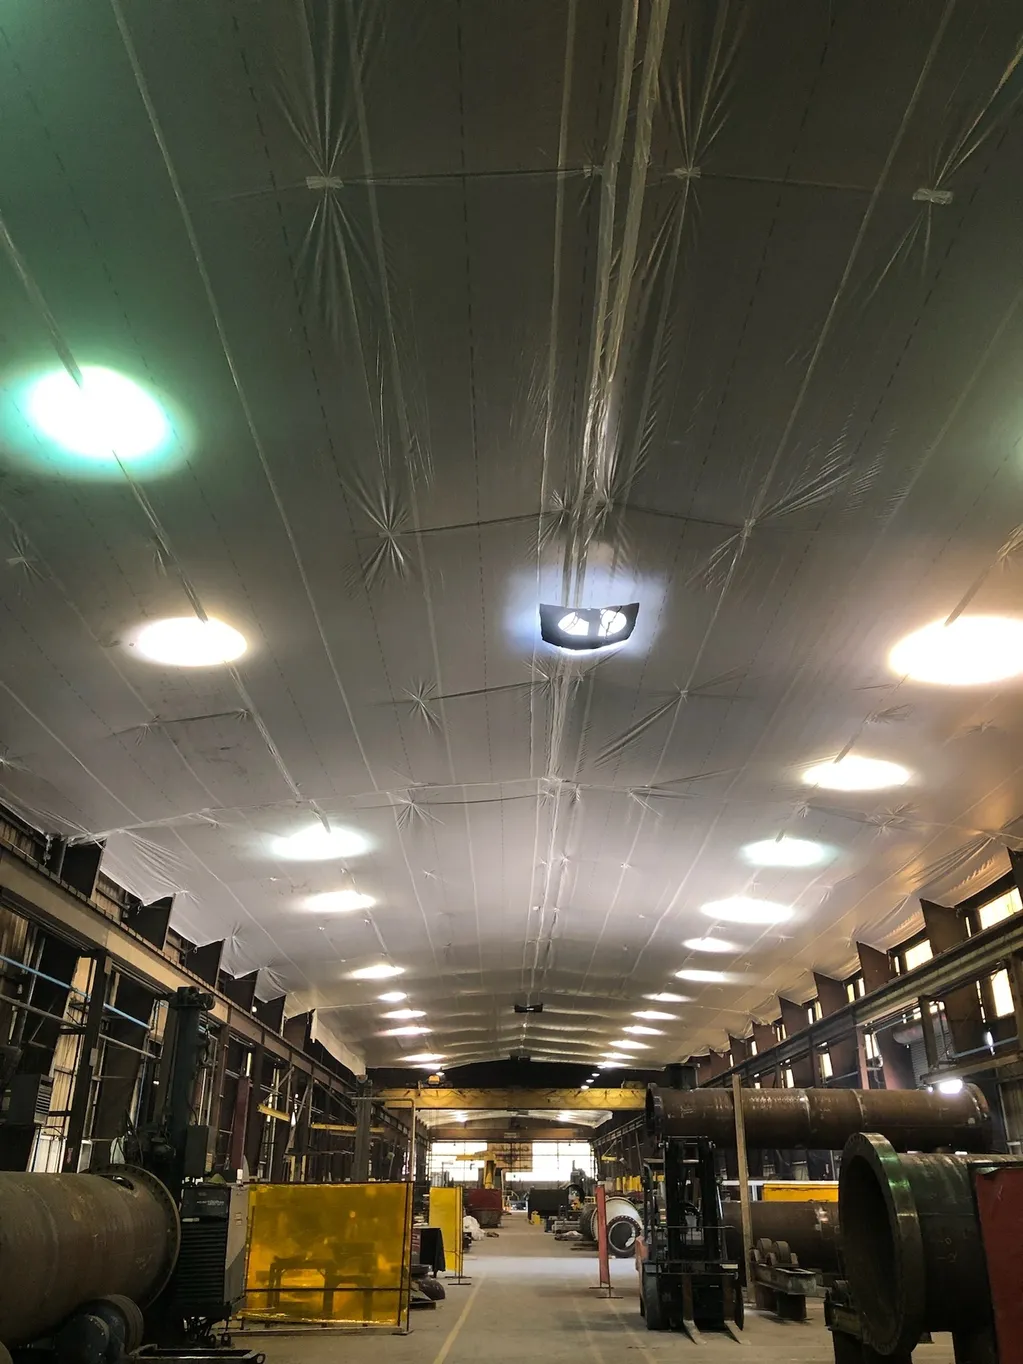 Temporary suspended ceiling covers inside a warehouse